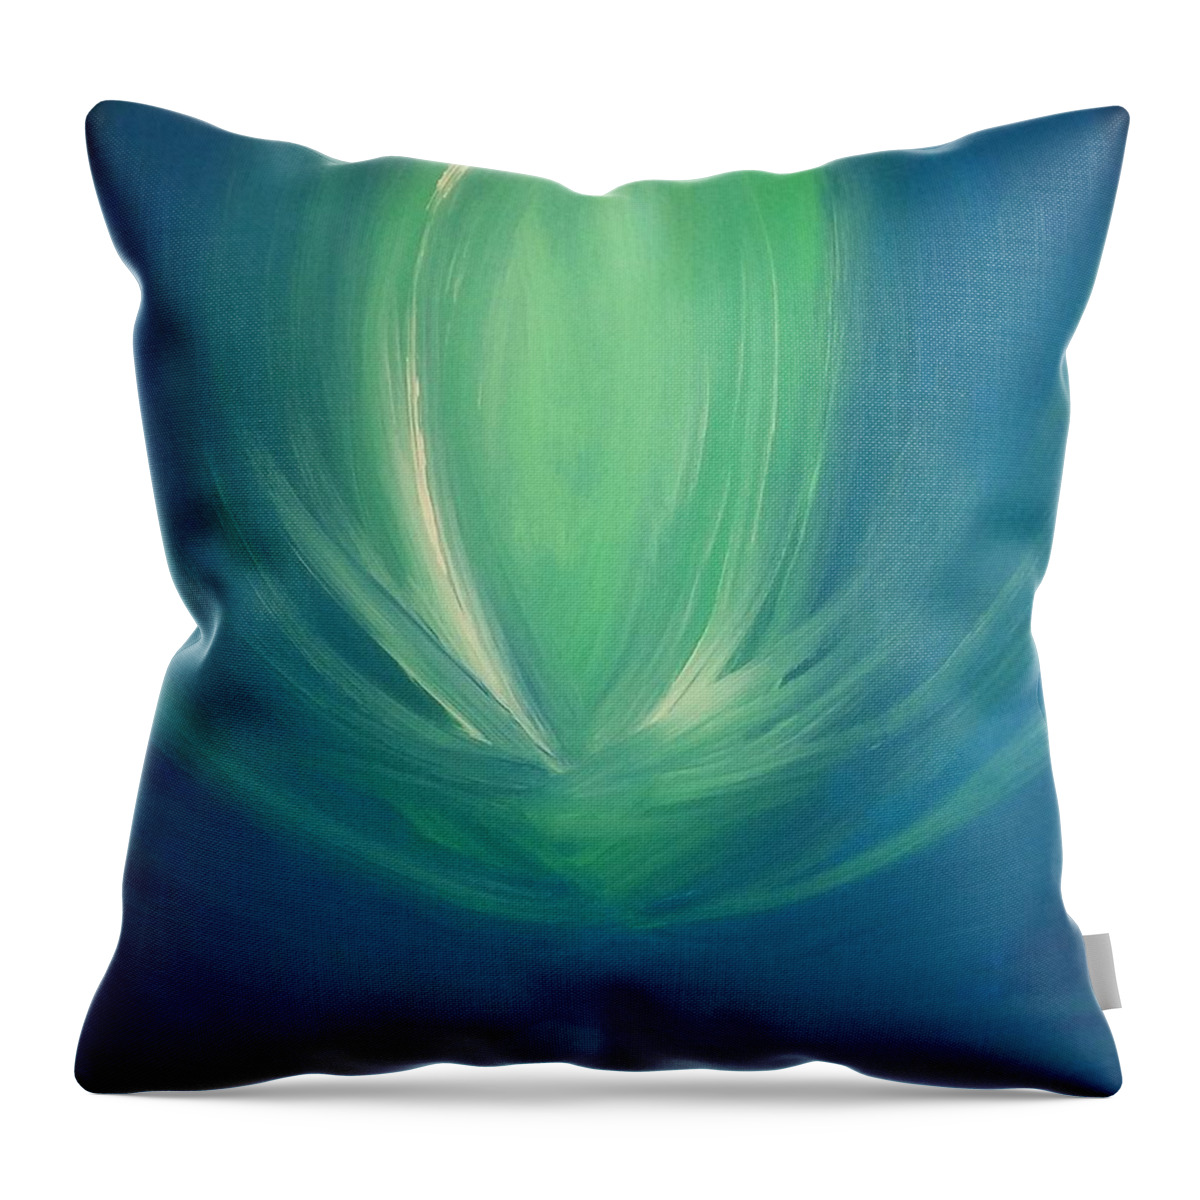 Lotus Throw Pillow featuring the painting Lotus Spirit by Vale Anoa'i